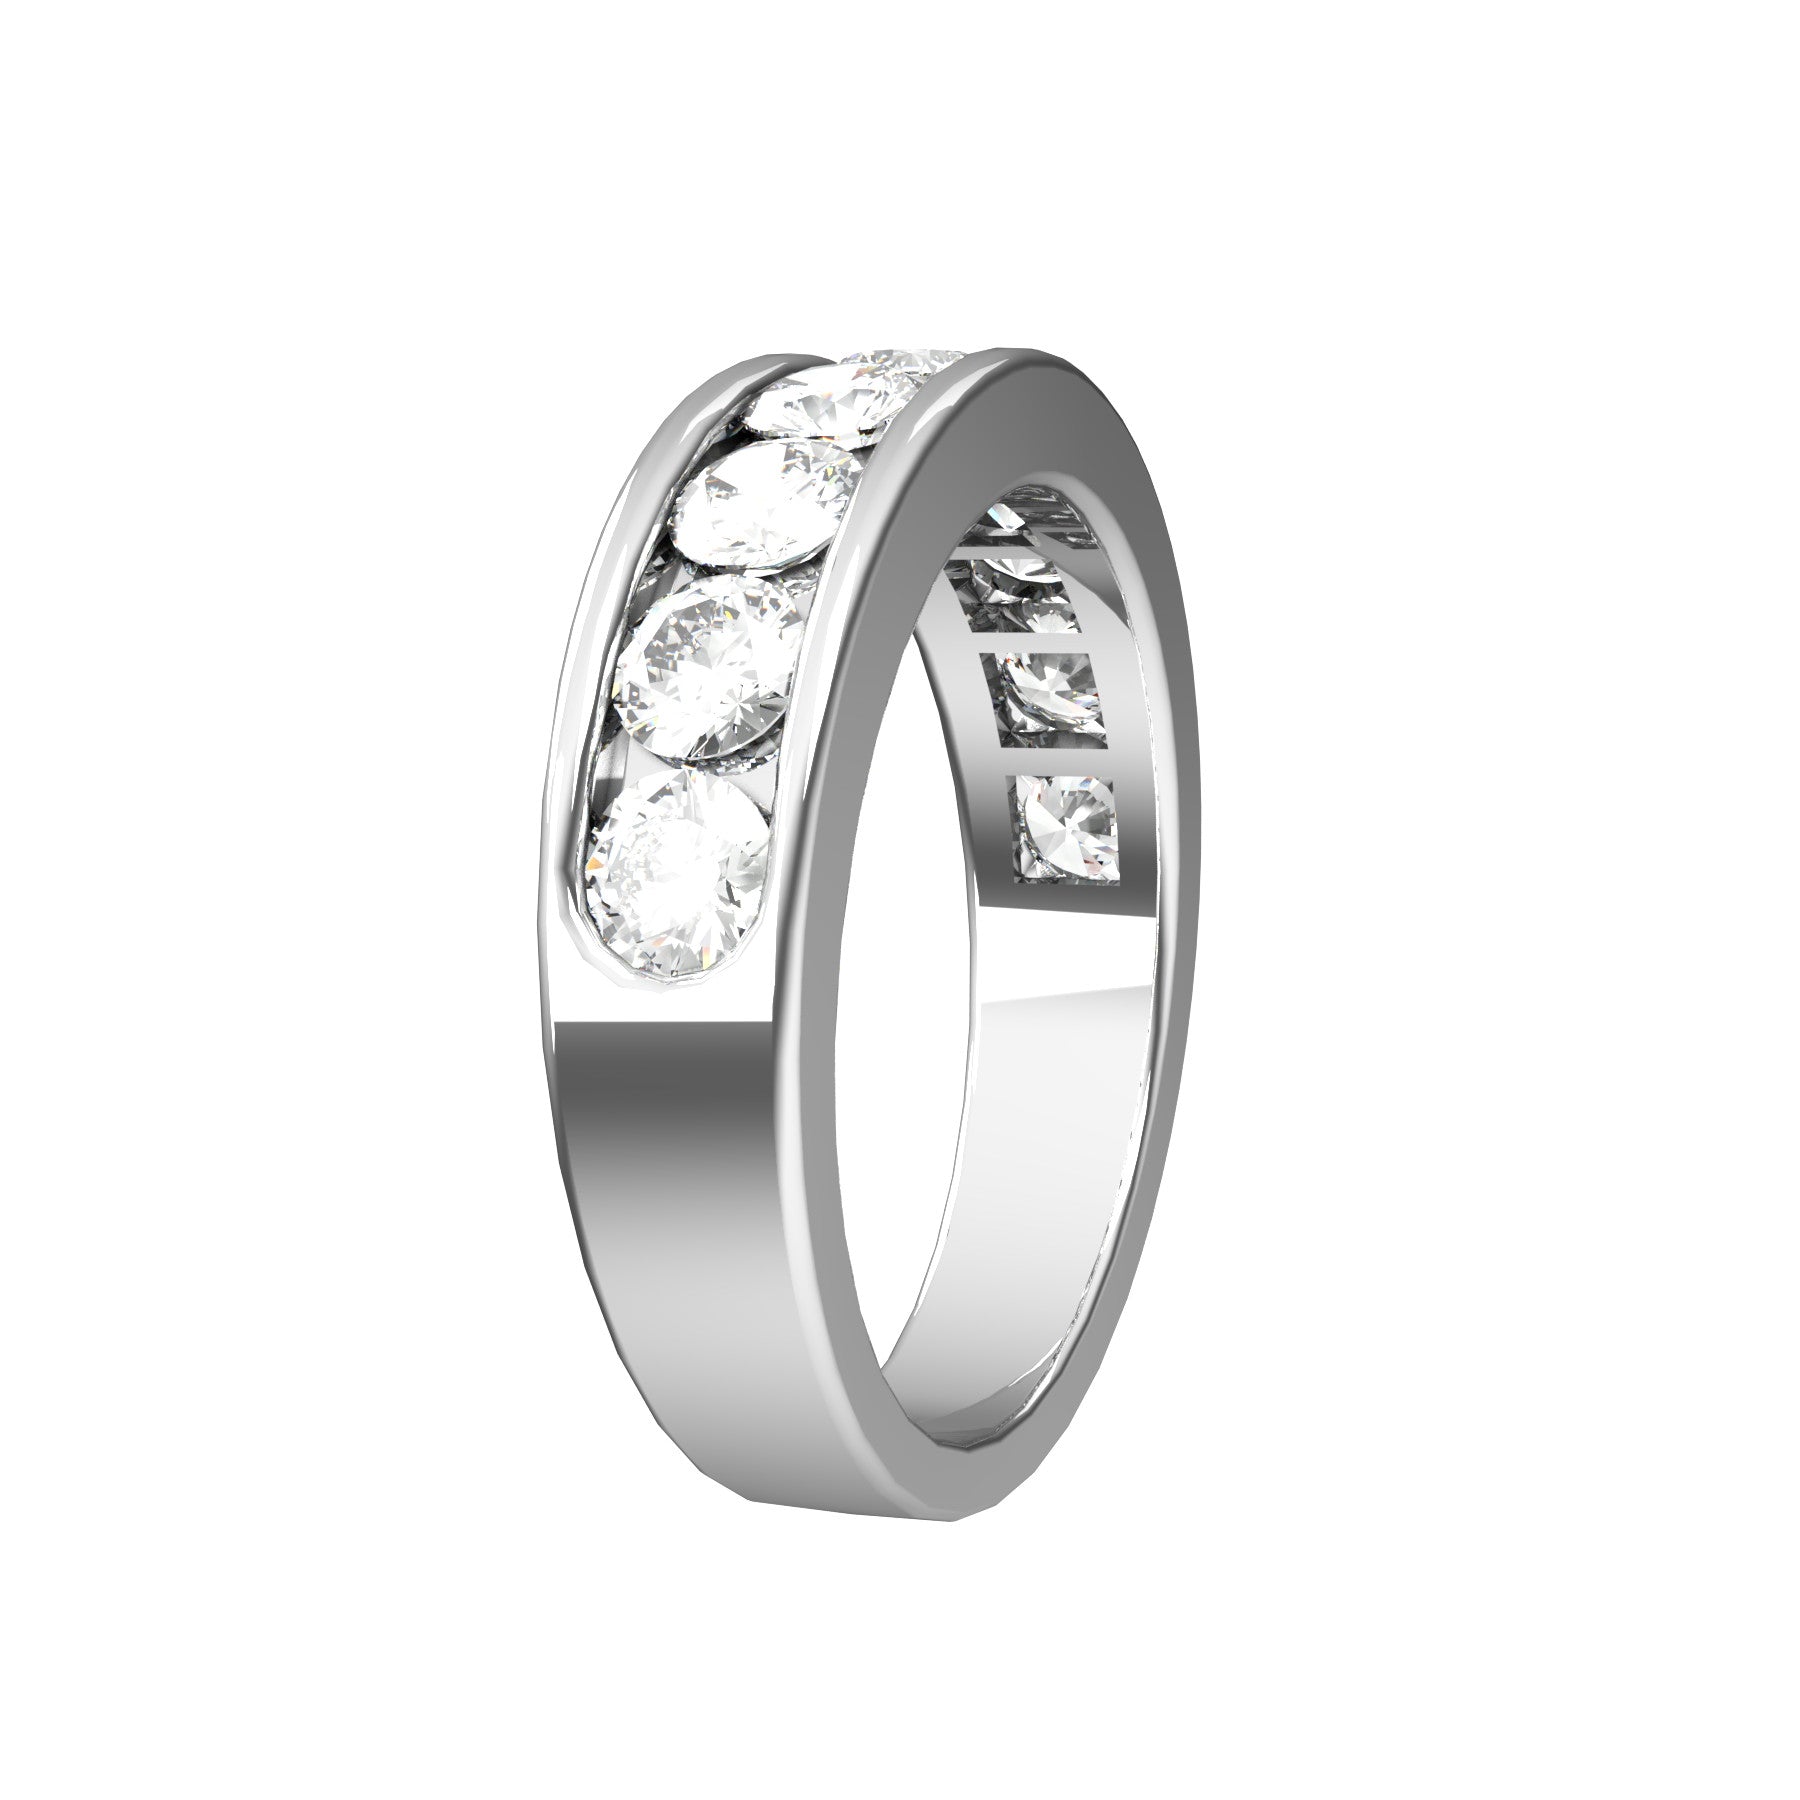 perpetual half wedding ring , 18 K white gold, 0,13 ct round natural diamond, weight about 5,6 g. (0.20 oz), width 5,40 mm